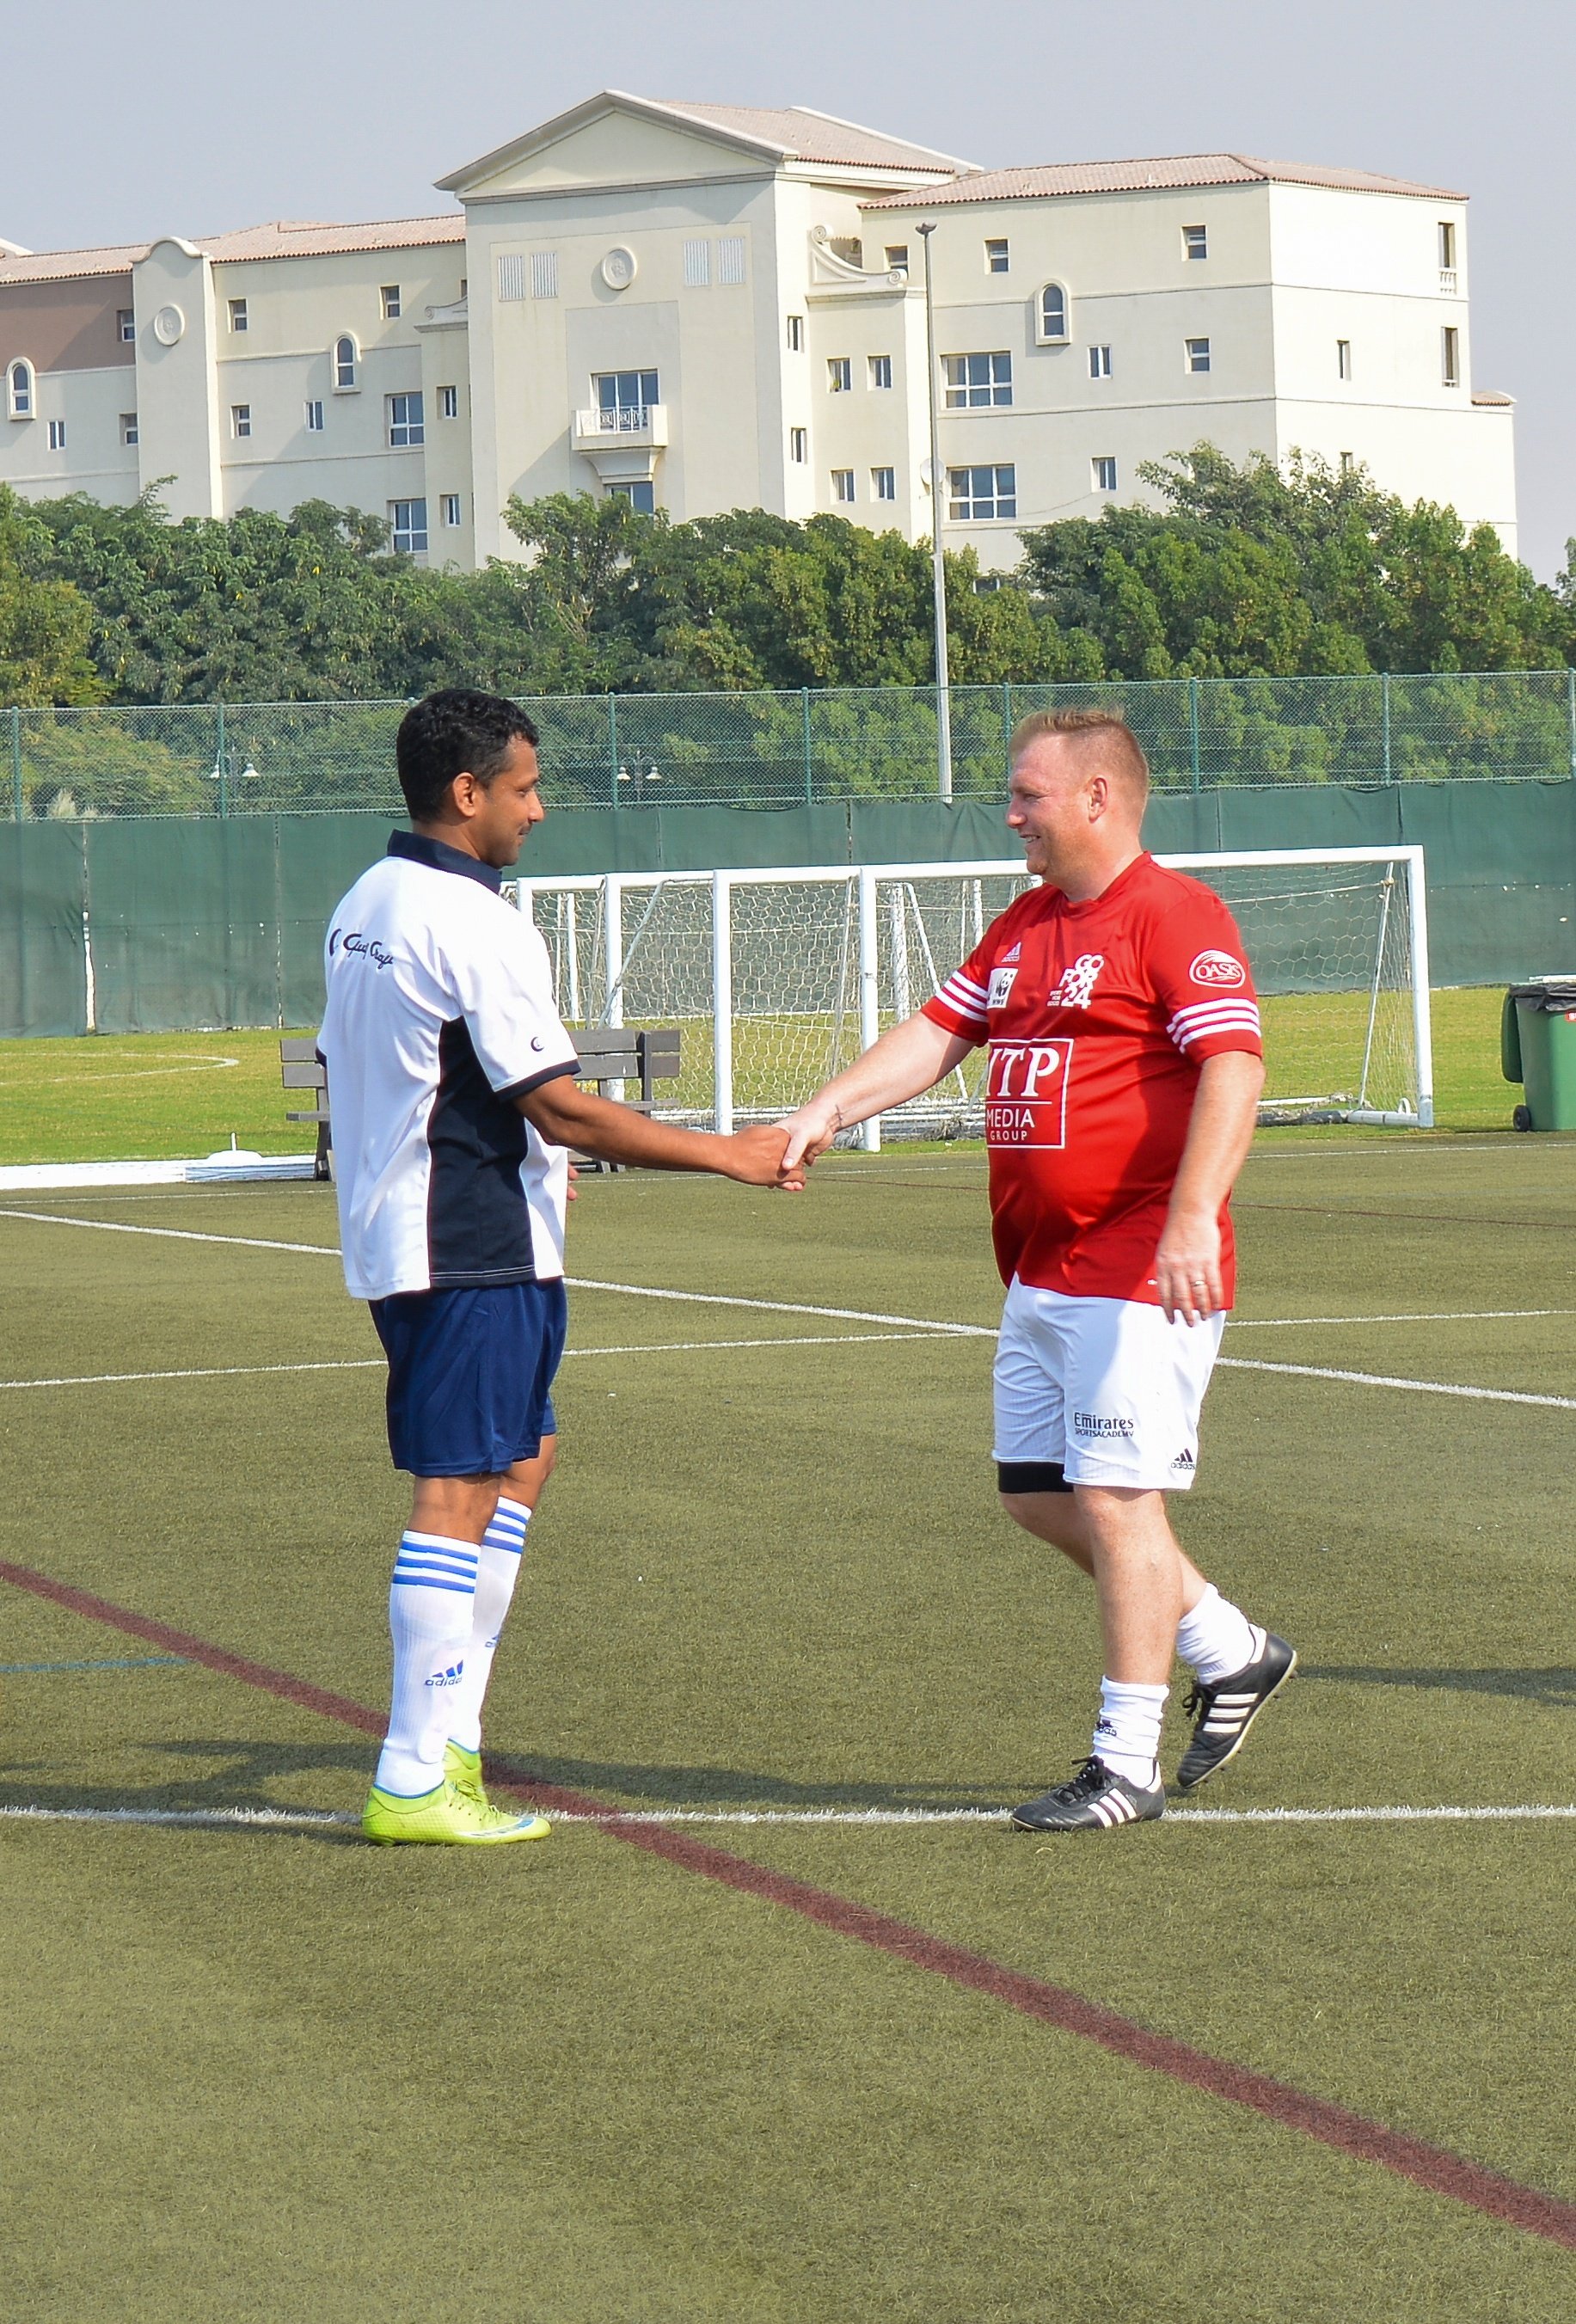 Gulf Craft team vs Heroes at the Oceans 24 Hour Football Challenge